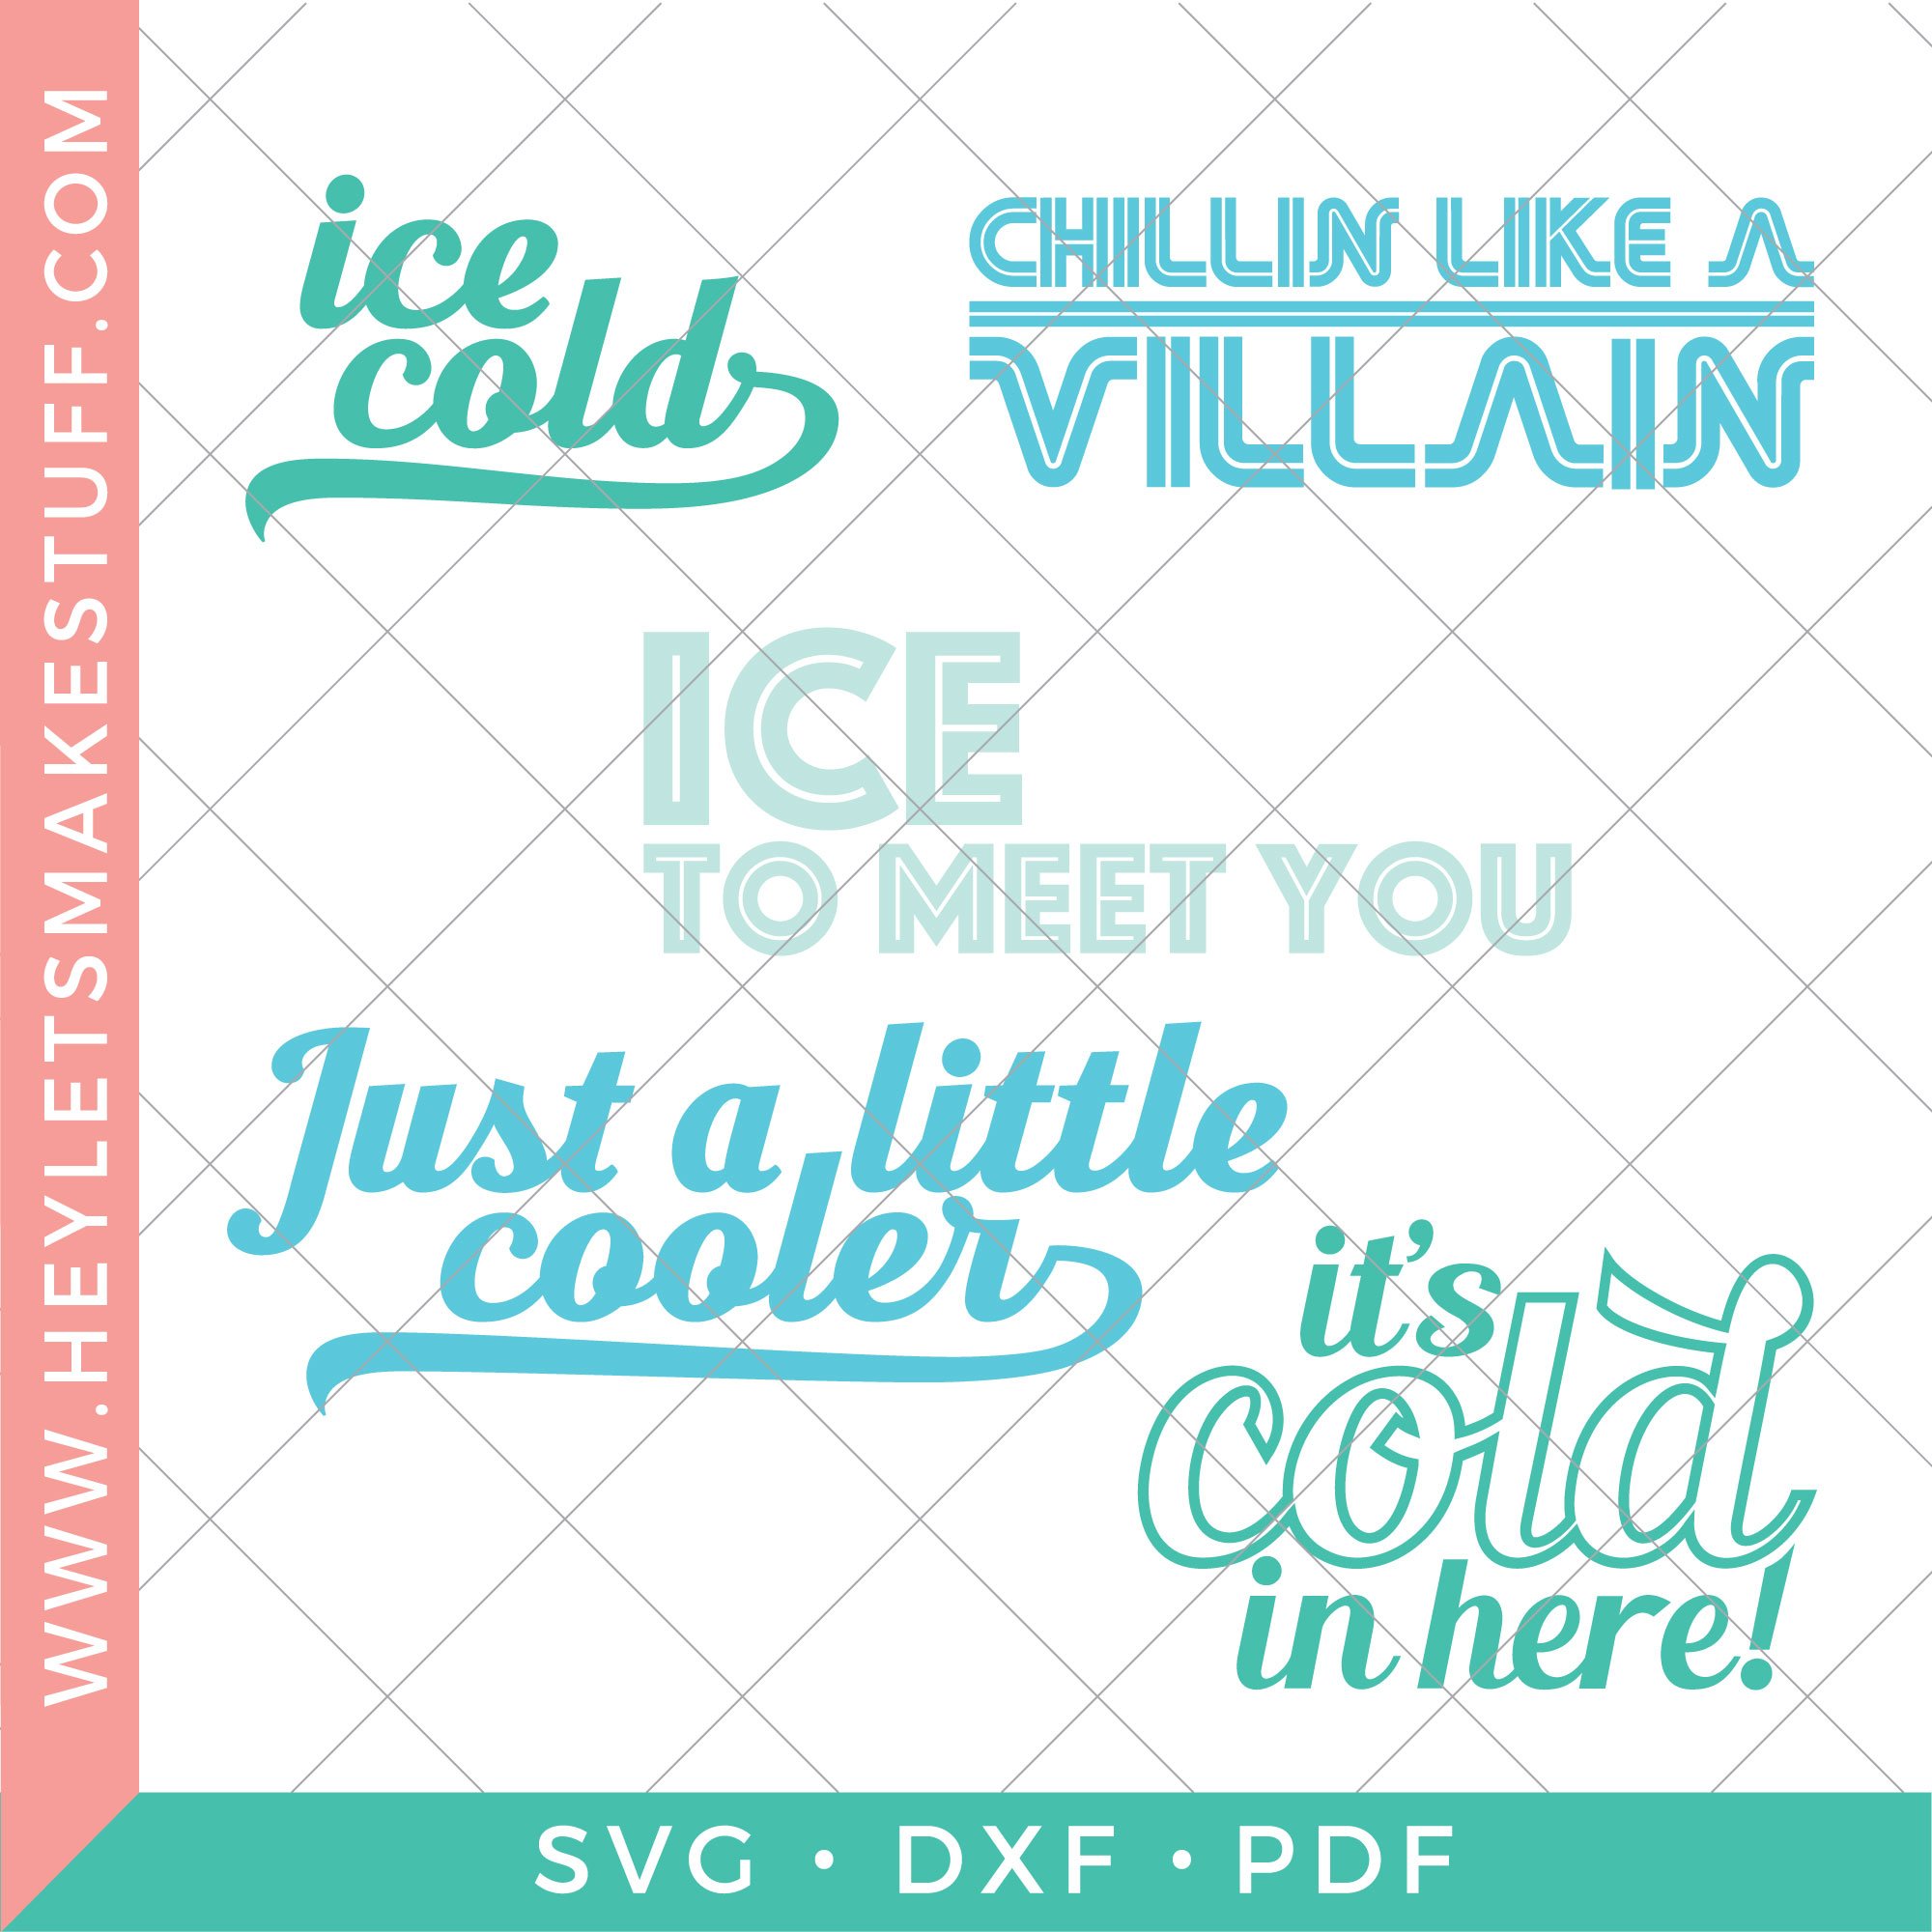 Image of cut files that say, \"Ice Cold\", \"Chillin Like a Villian\", \"Ice to Meet You\", \"Just a Little Cooler\" and \"It\'s Cold in Here!\"